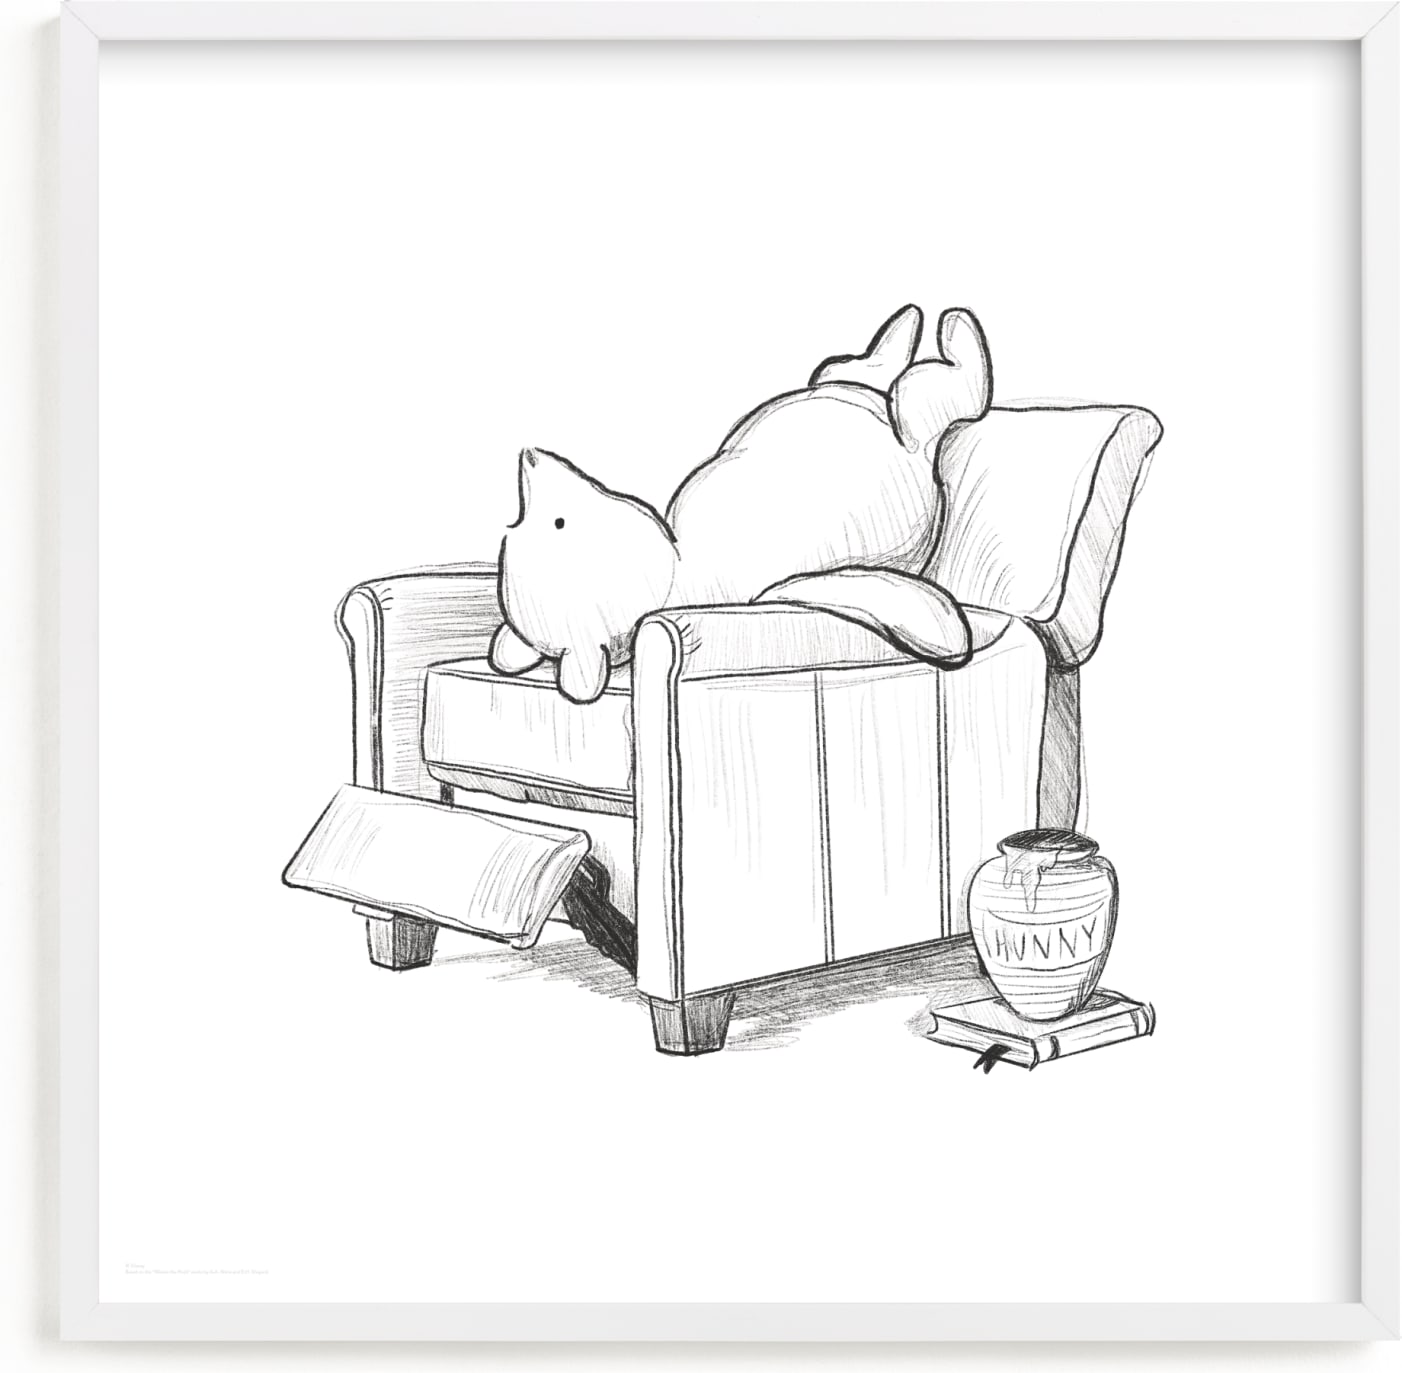 This is a black and white disney art by Stefanie Lane called Pooh Lounging.